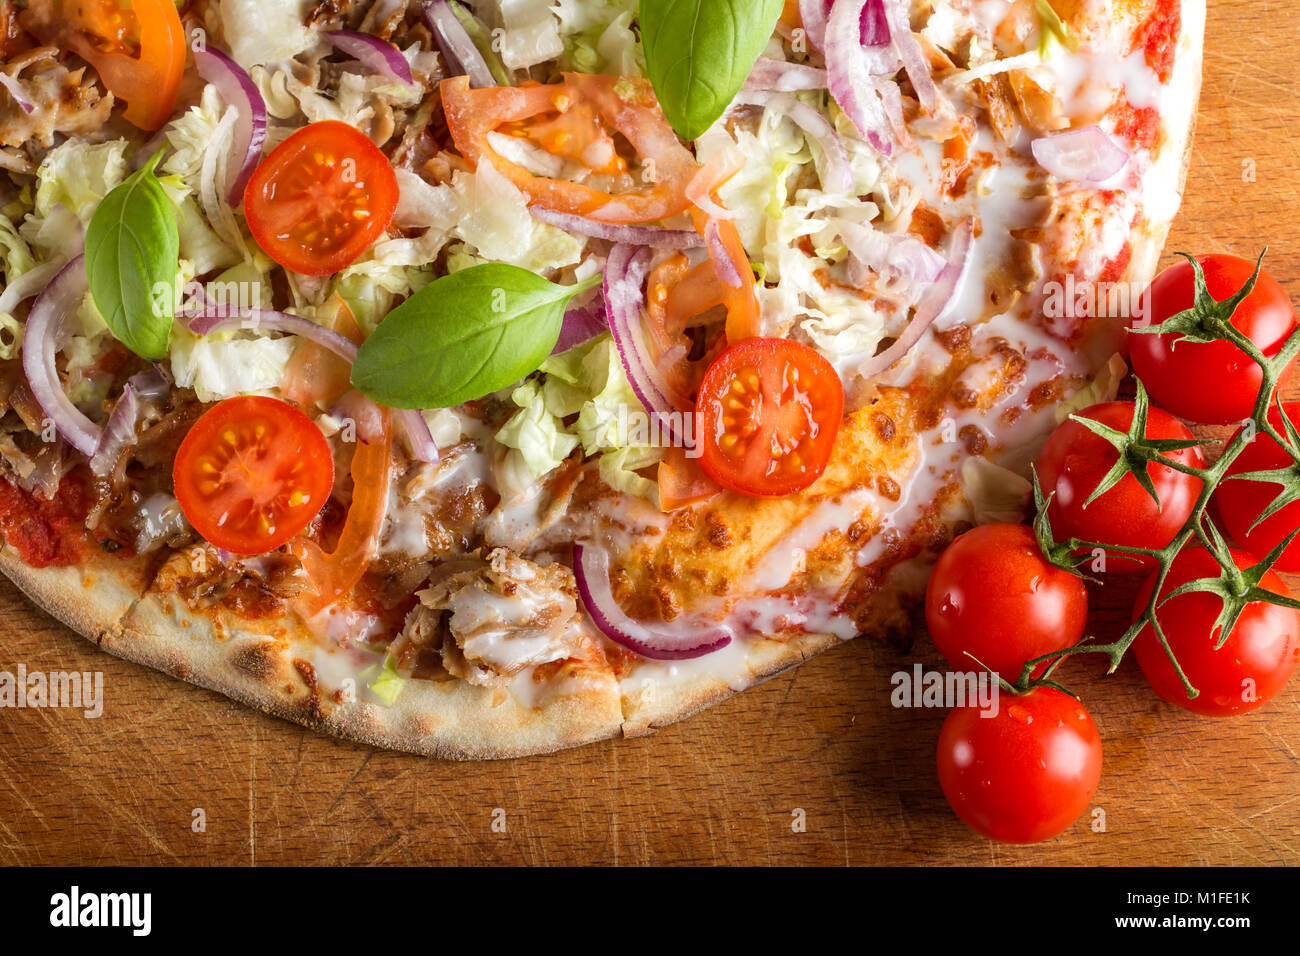 Close up of kebap pizza made with minced meat, cabbage, tomato and garlic sauce Stock Photo